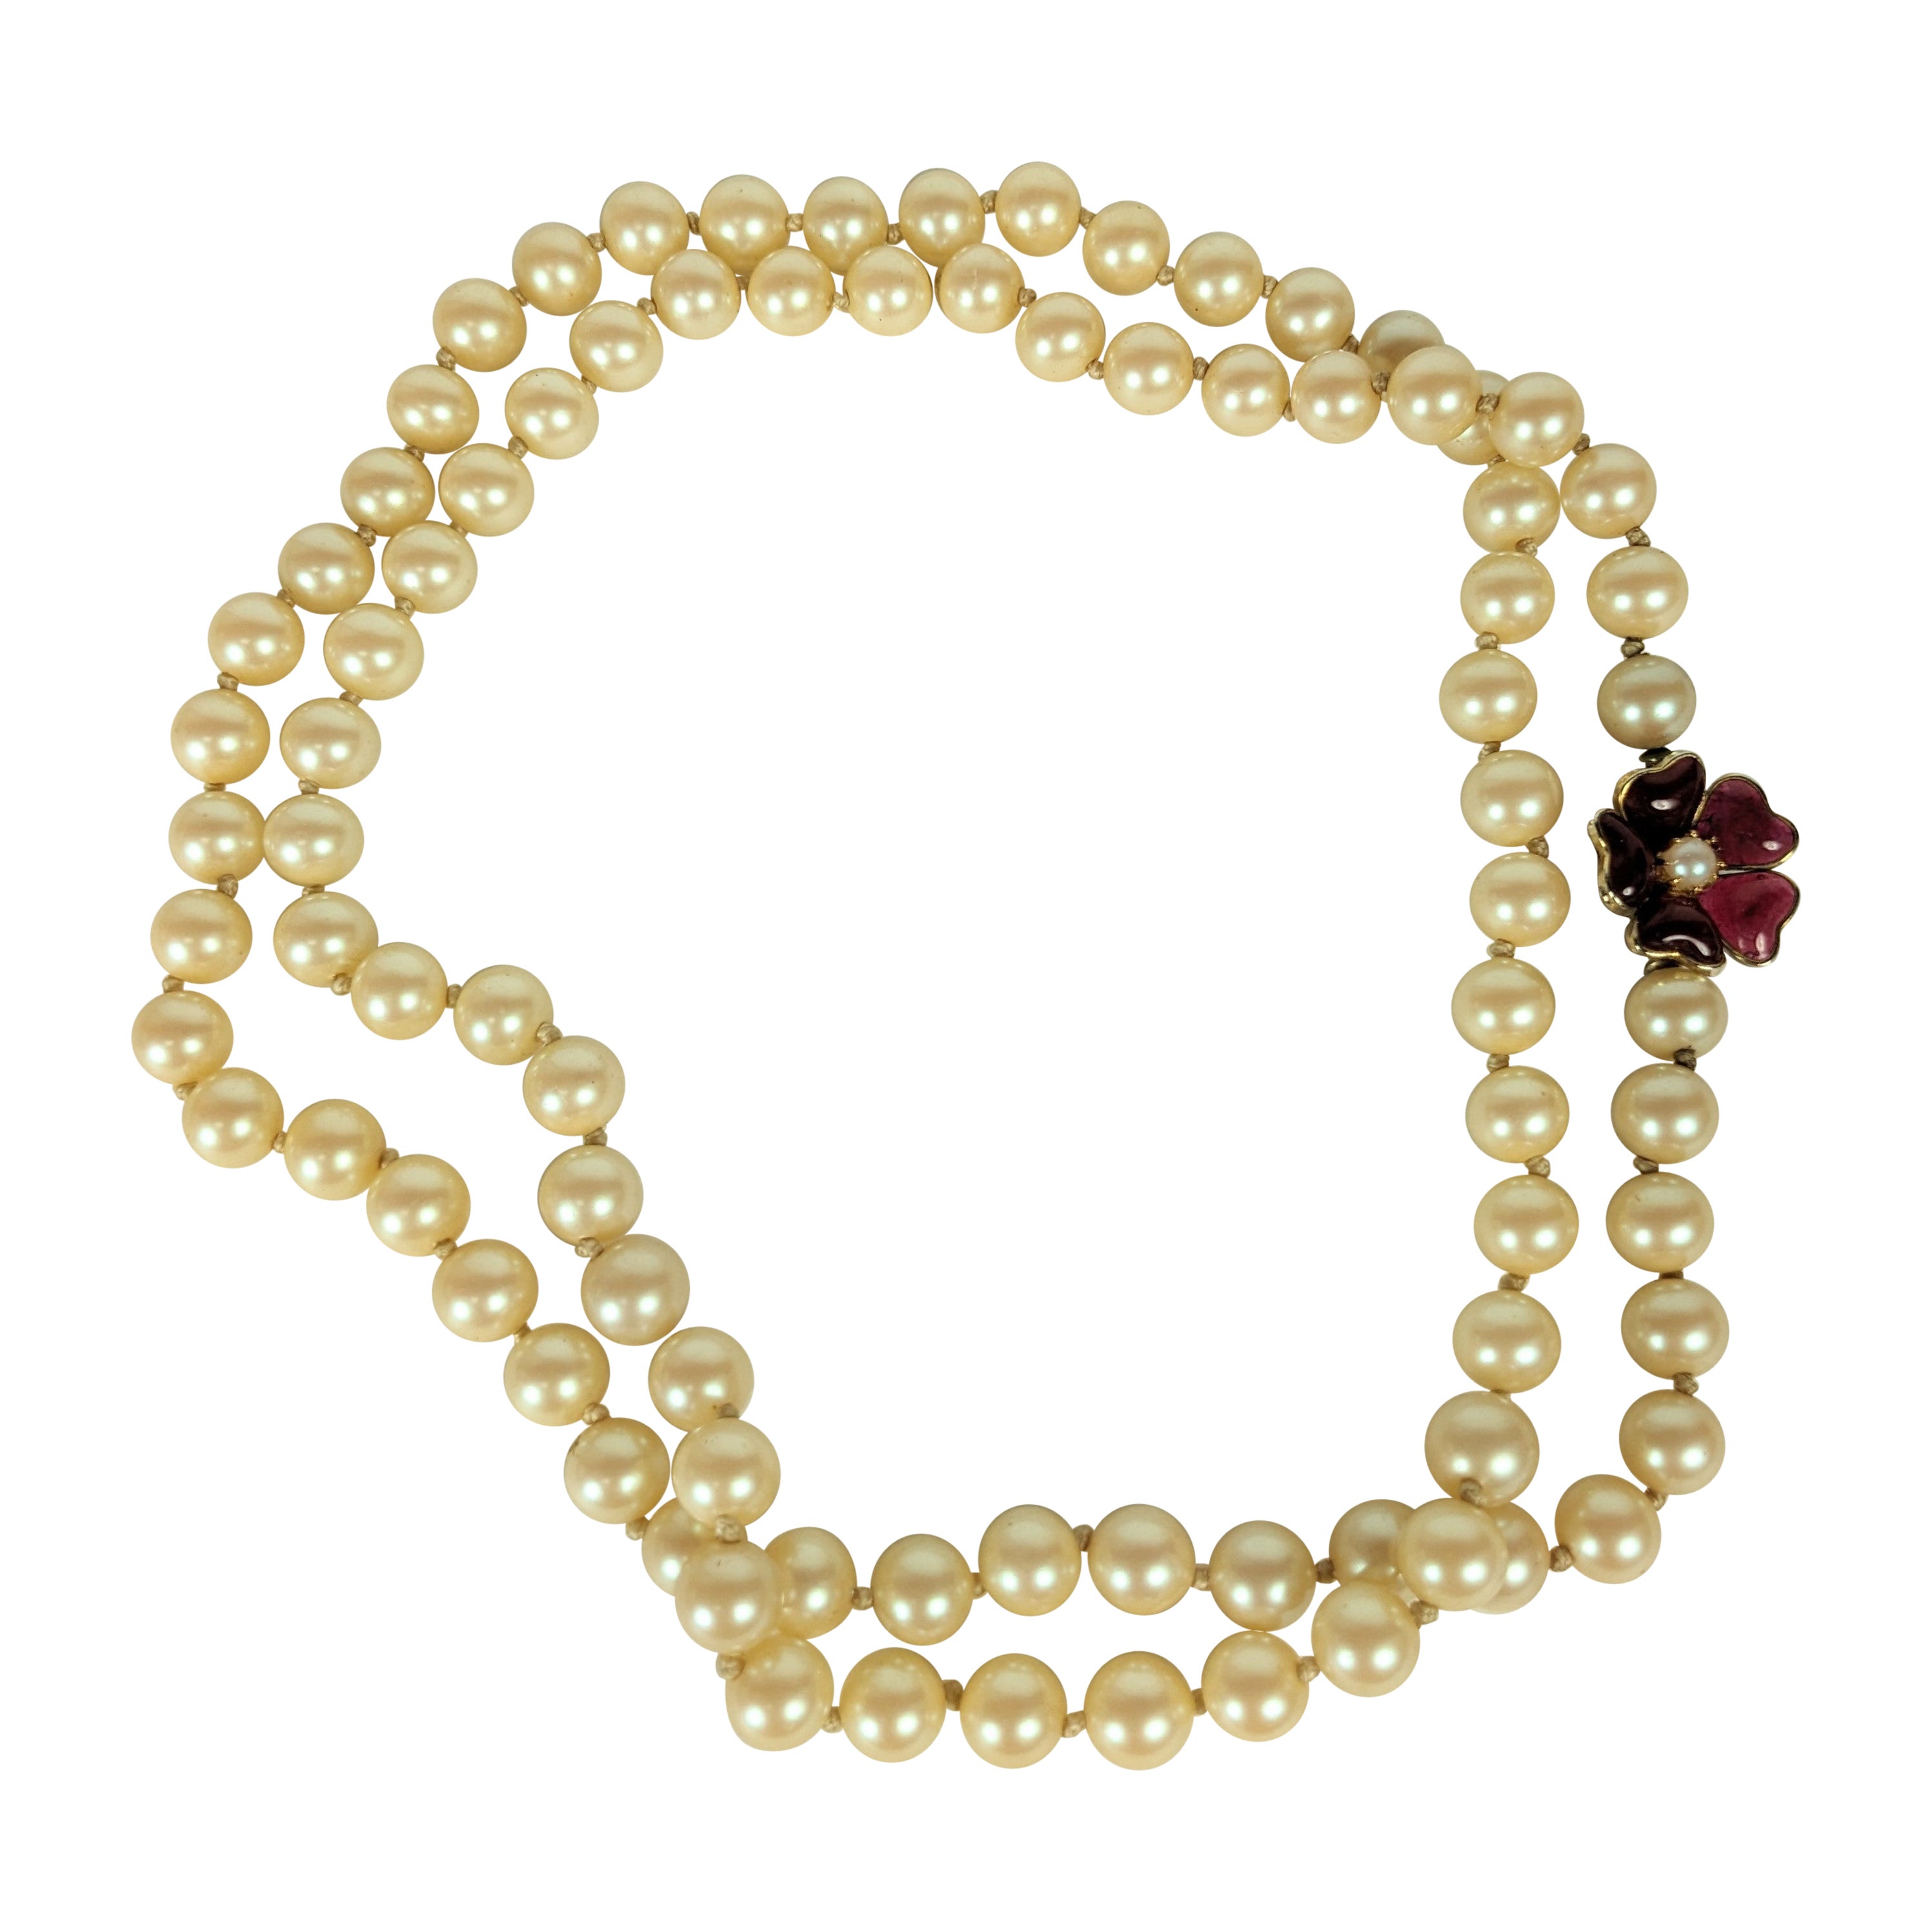 Vogue Pearls with Gripoix Flower Clasp